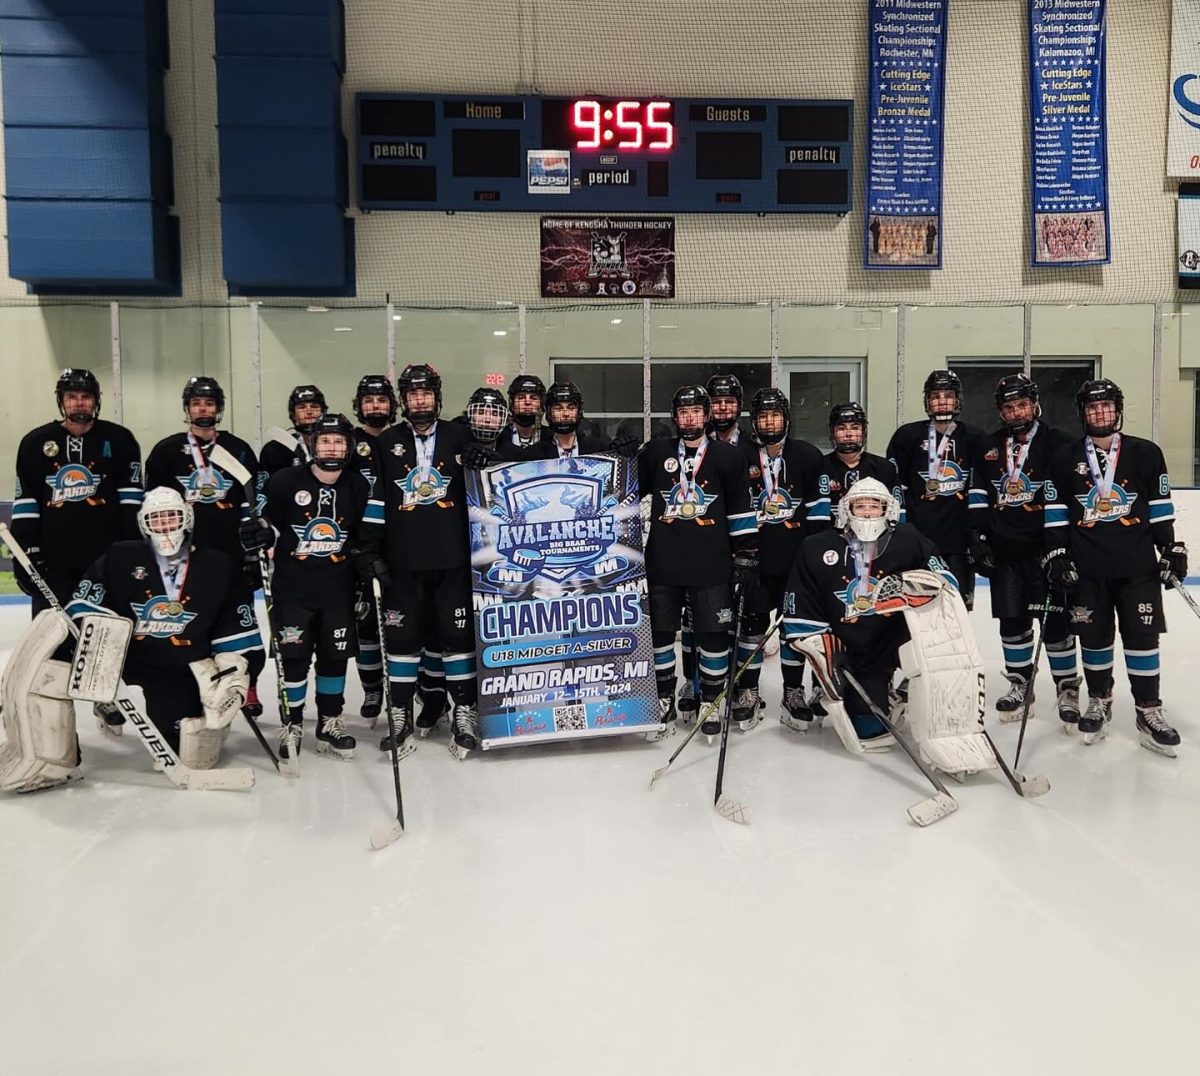 Both of Lakers teams traveled to Michigan over MLK weekend. Varsity played in their final Sunday against Lake Hockey winning 4-2. JV played in their final Monday against the South Stars winning 4-3. Both teams bringing home a championship banner.